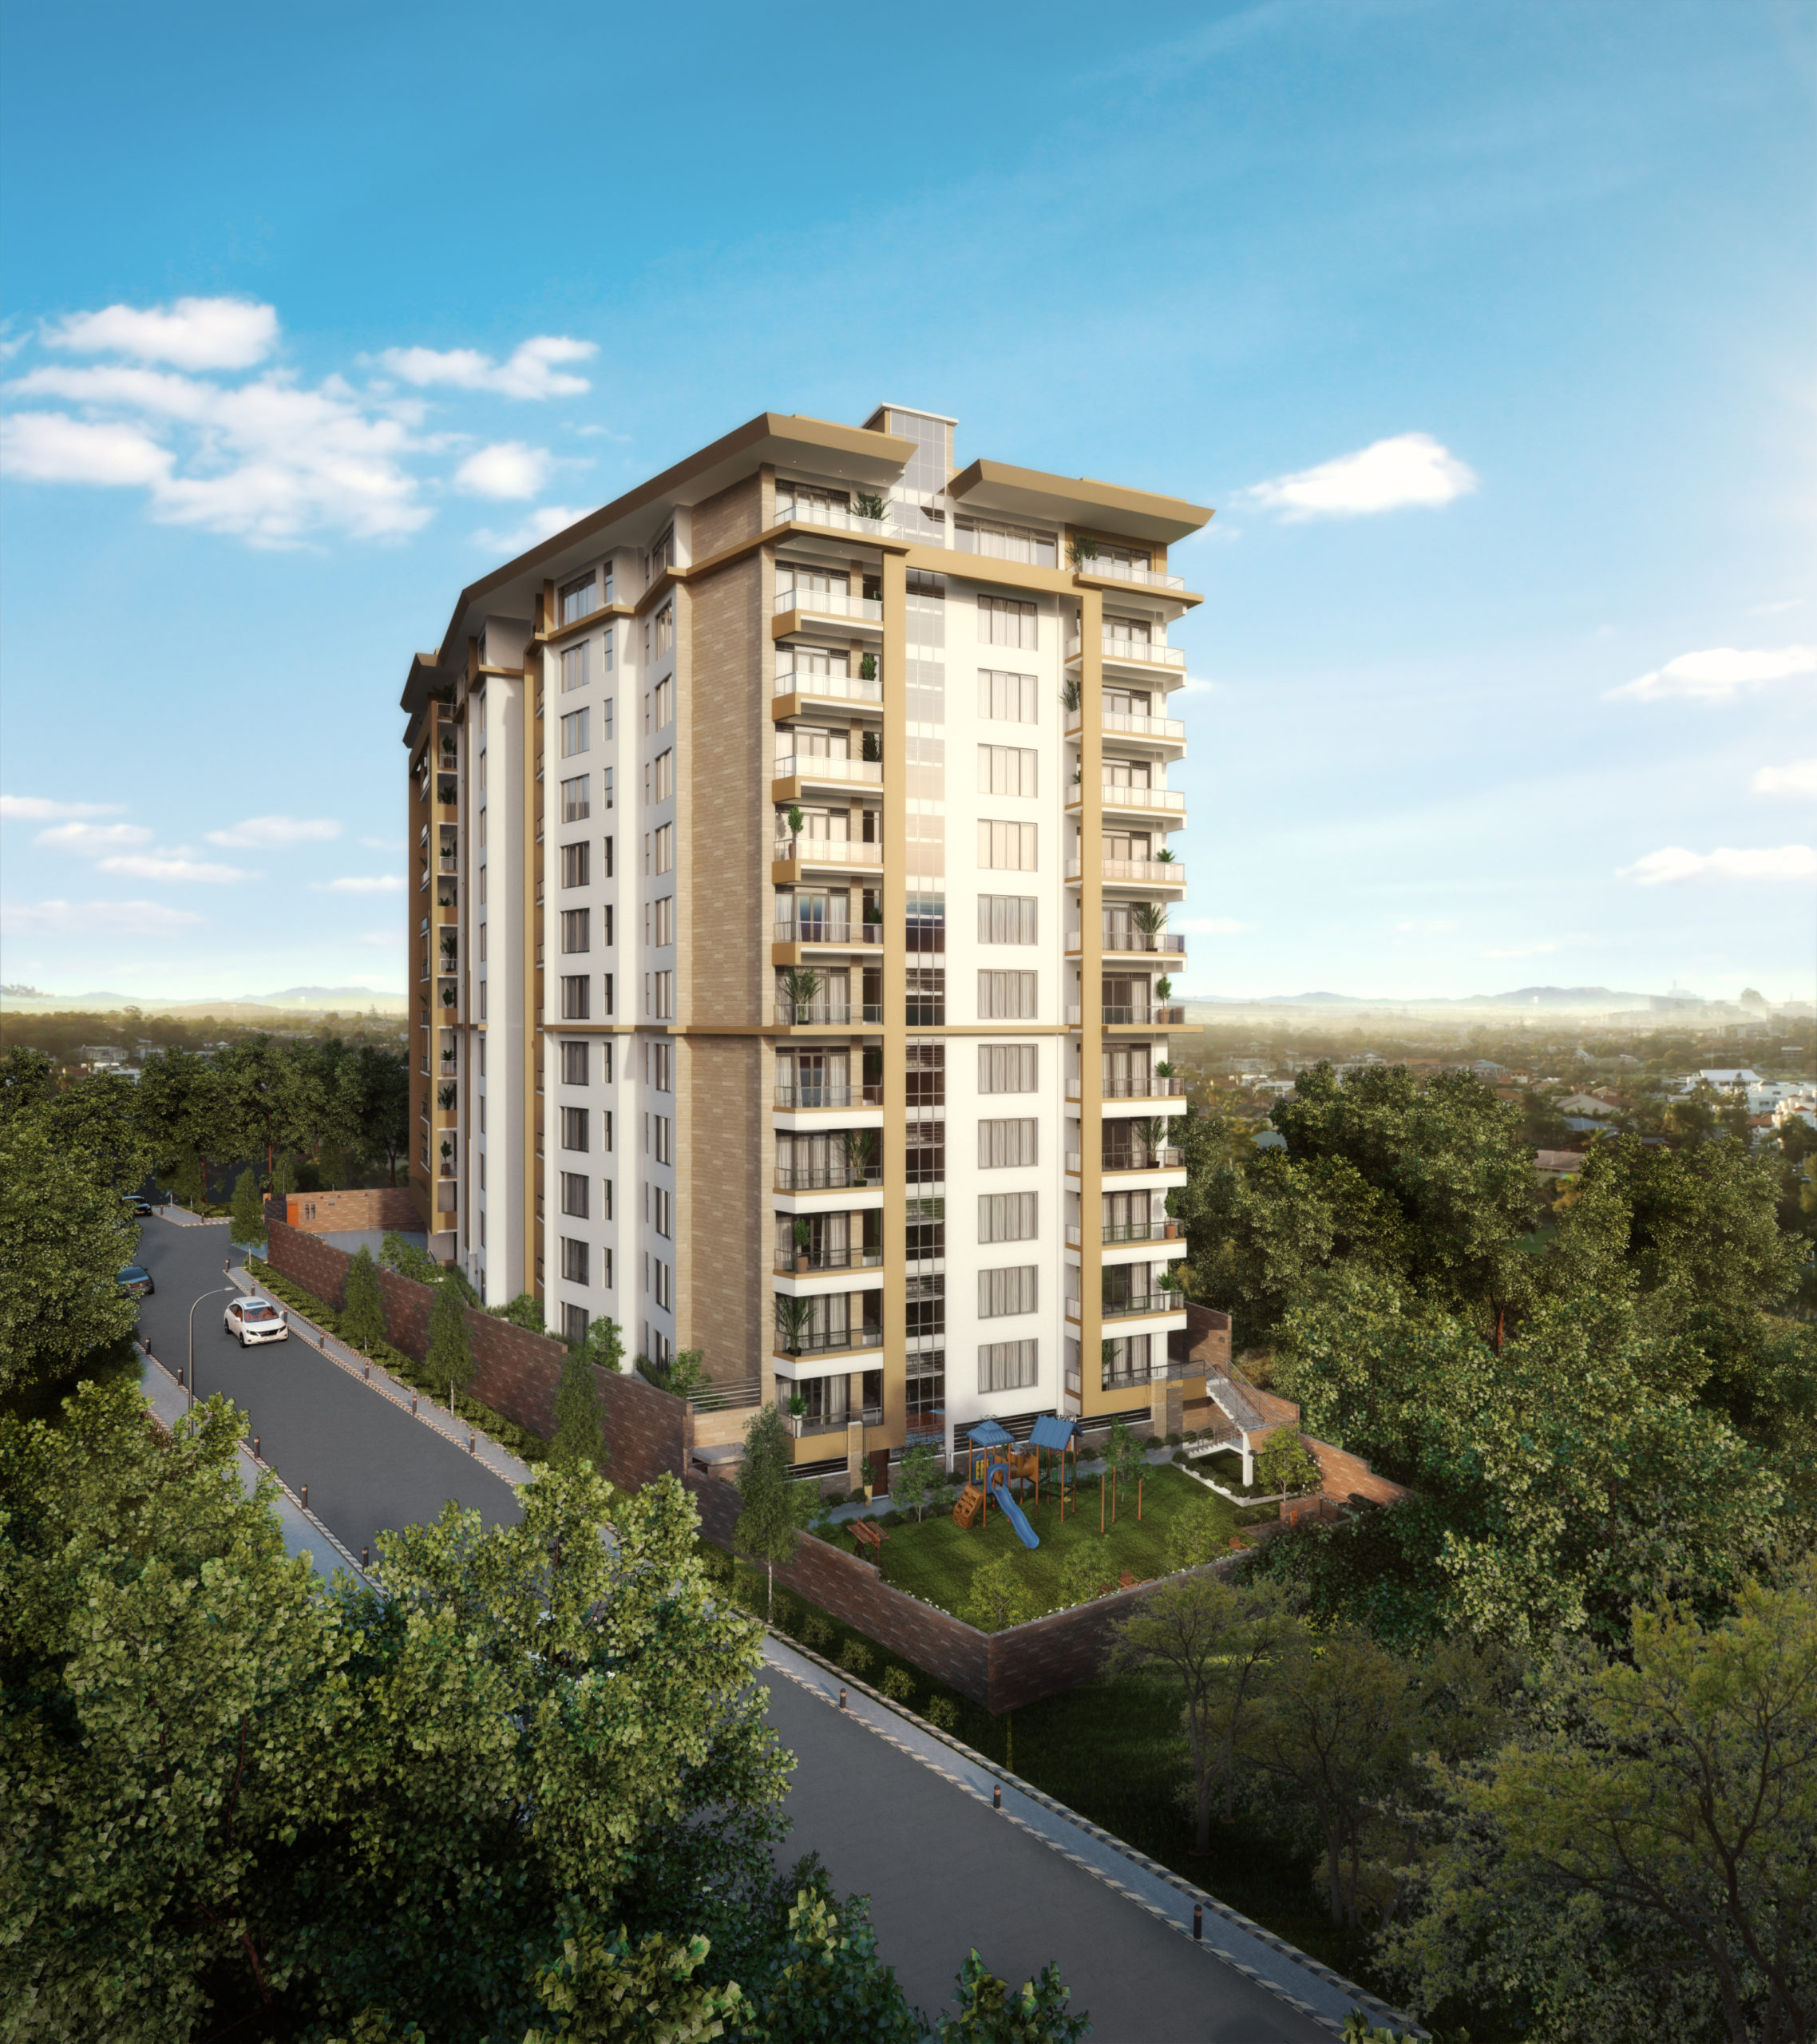 Rosewood 3 Bedrooms plus SQ Apartments for sale in Kilimani